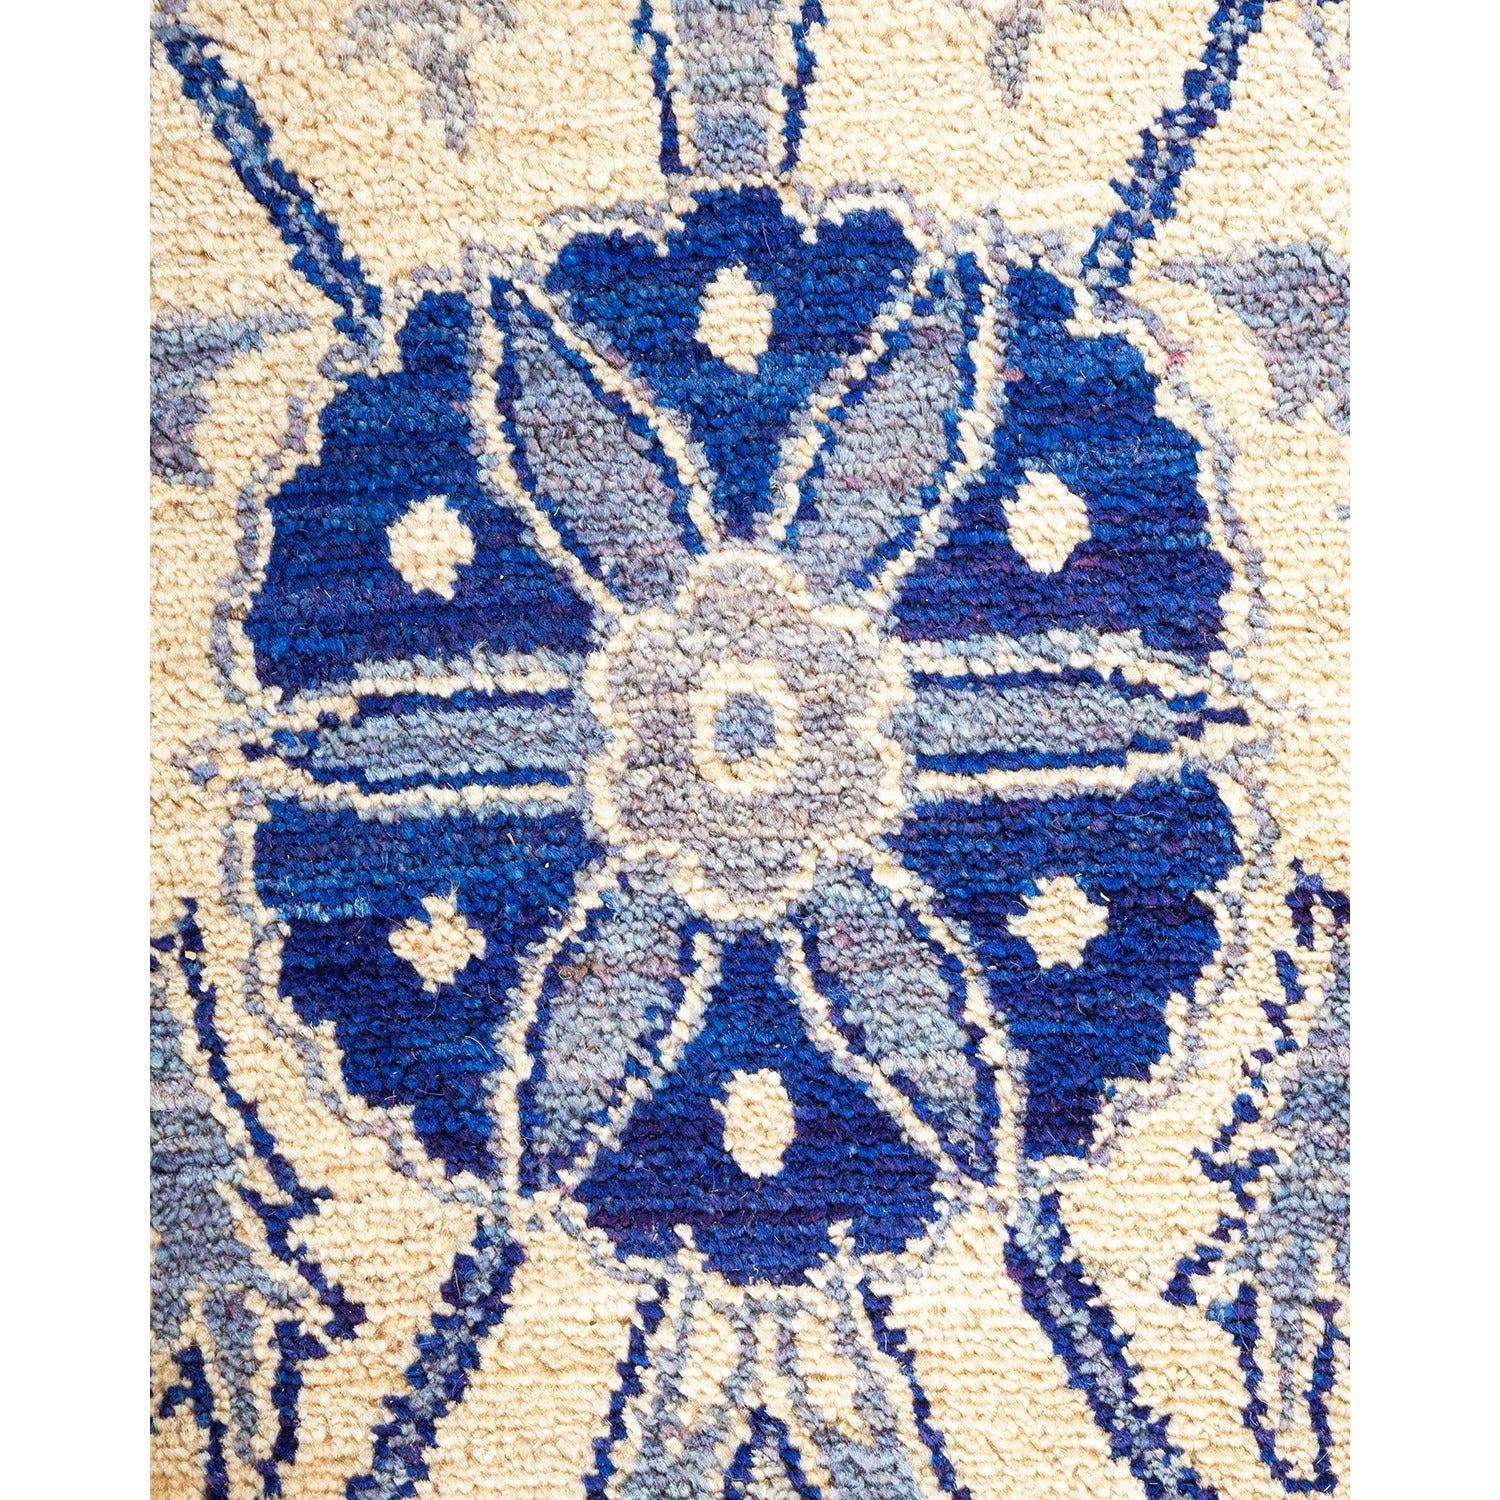 Intricate symmetrical design of a plush blue textile with beige.